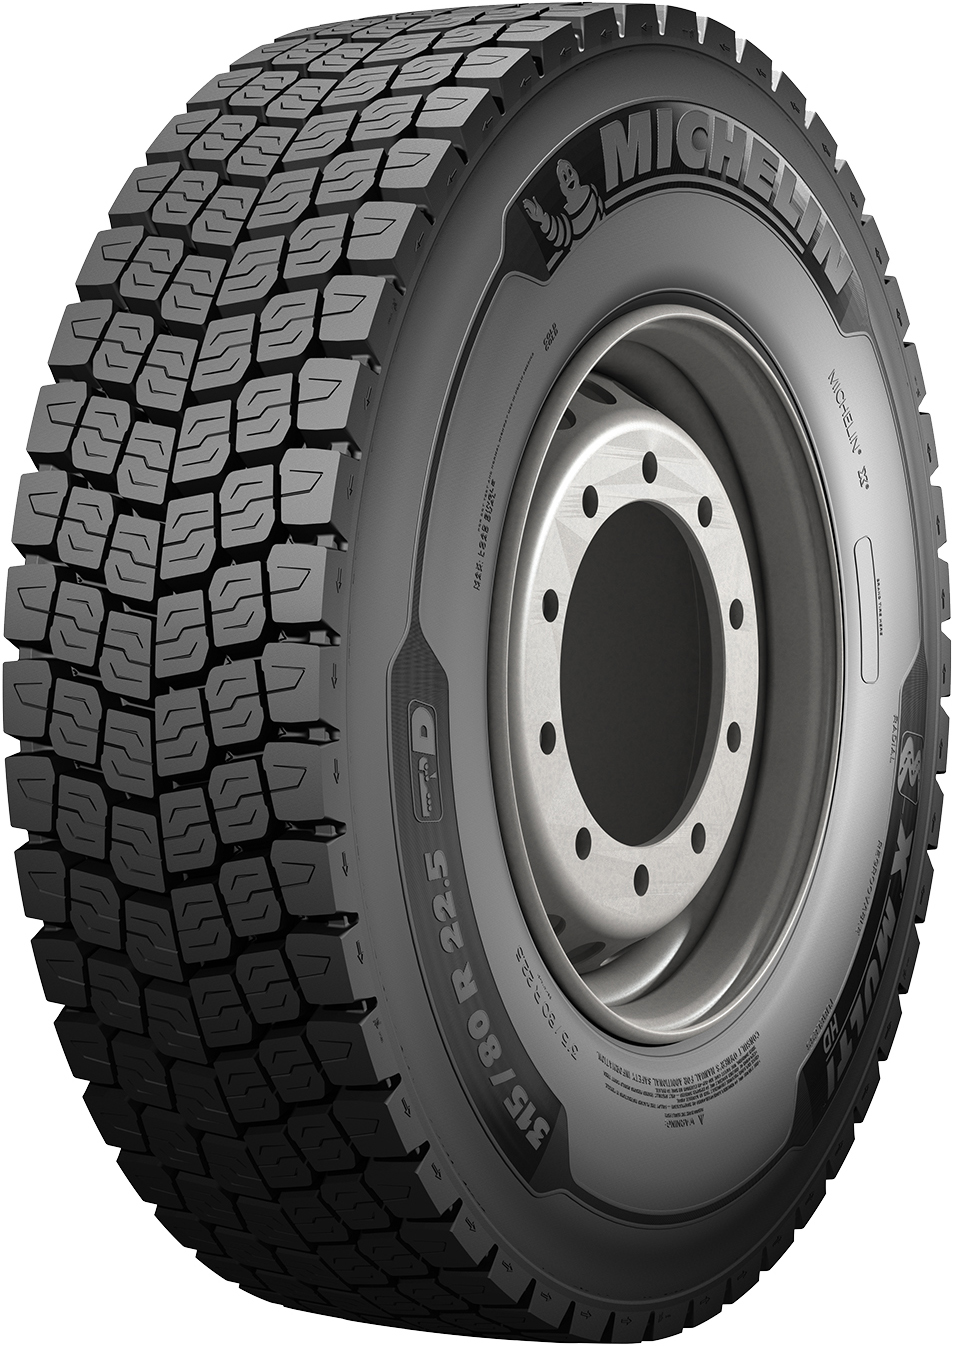 Anvelope camion MICHELIN XMULTIHDD 315/80 R22.5 156L